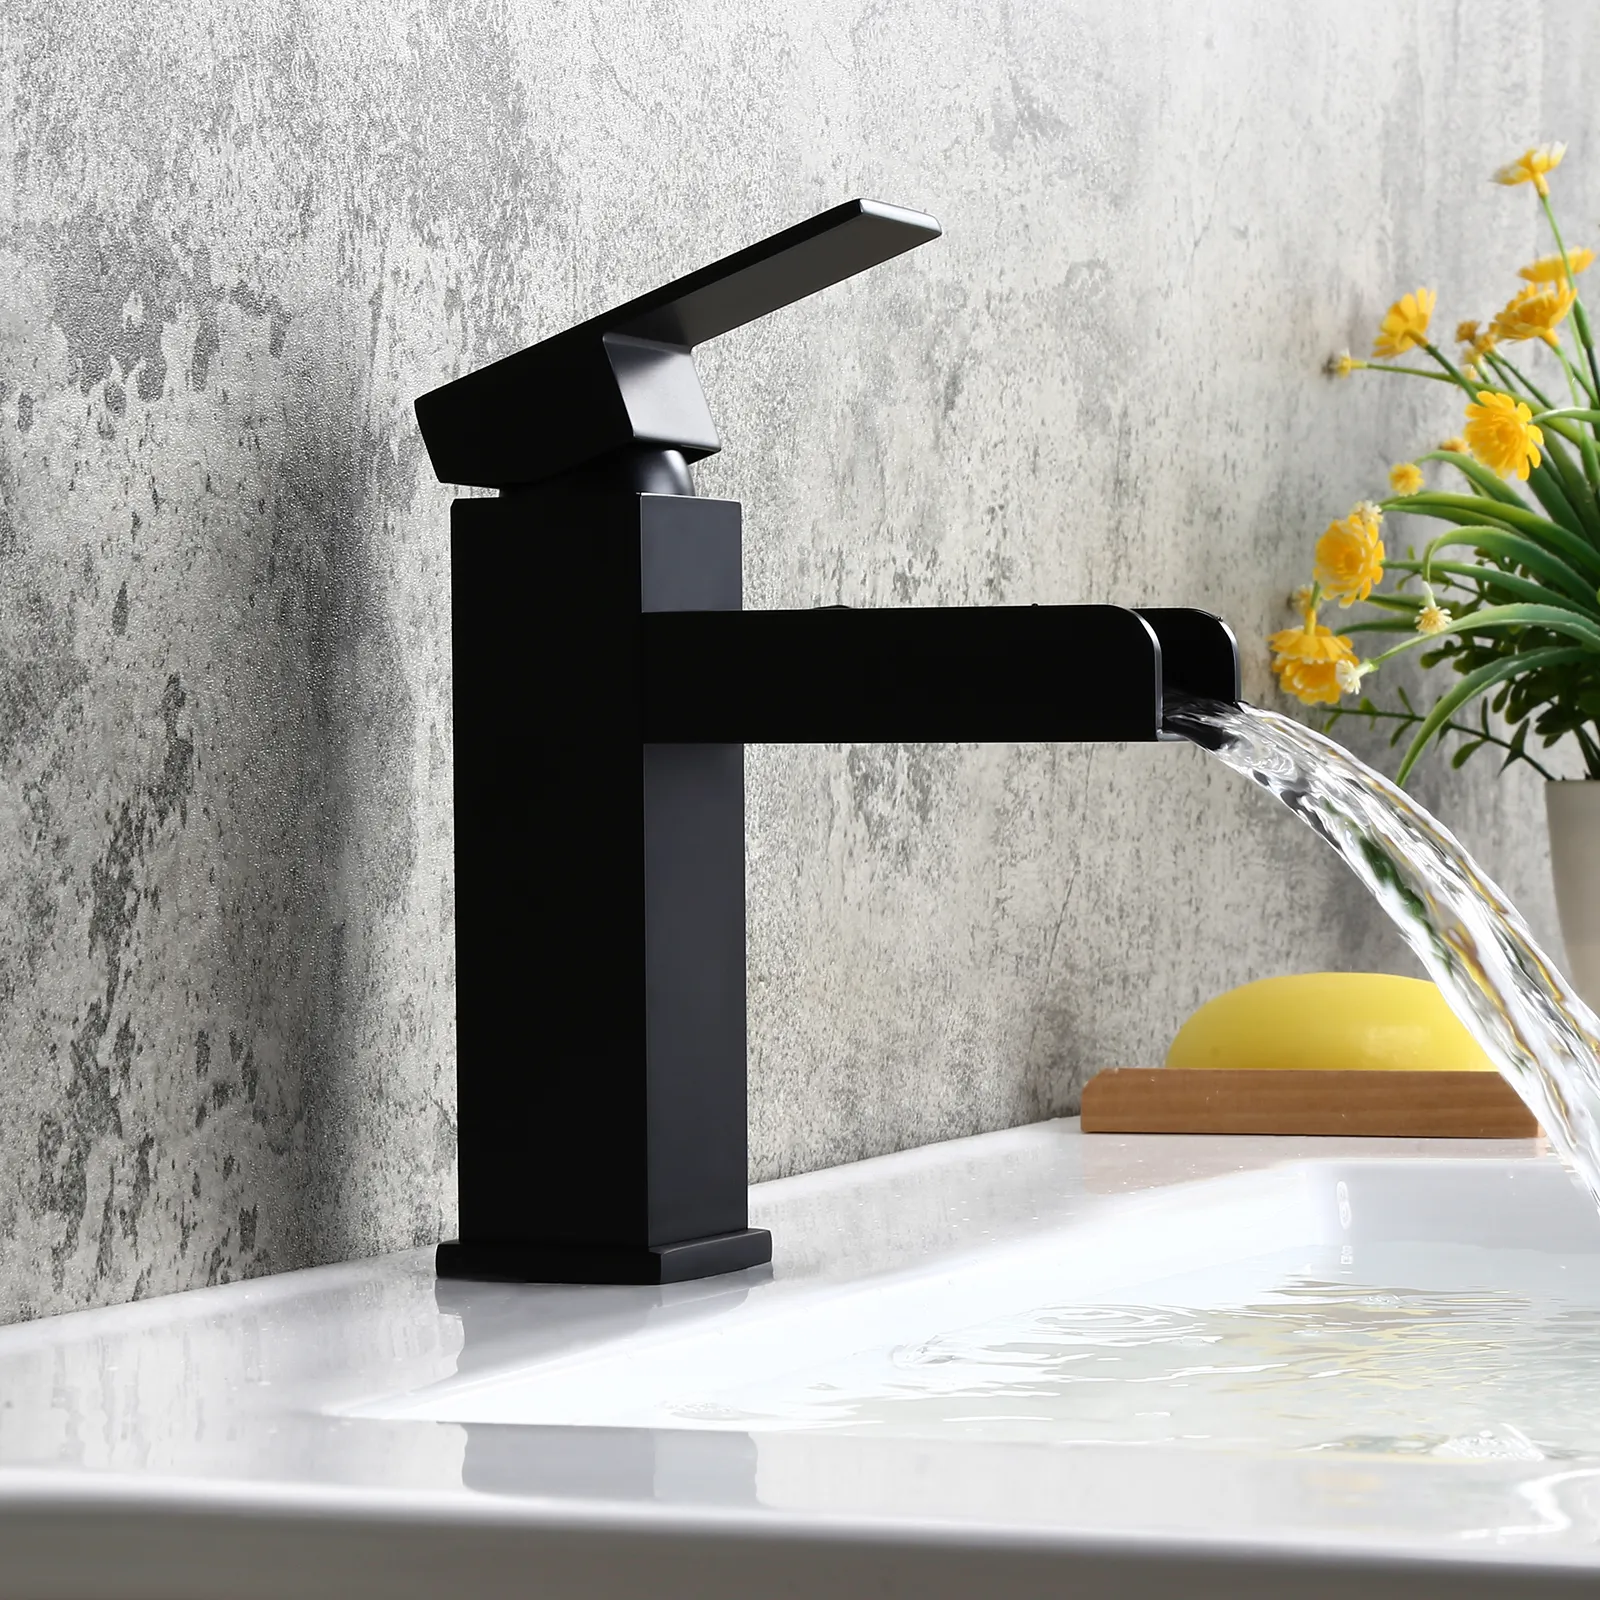 Mid-tall Size cUPC Certified Homary Modern Solid Brass Matte Black Waterfall Bathroom Vessel Sink Faucet Open Channel Spout Cascade Bathroom Faucet with Pop Up Drain 